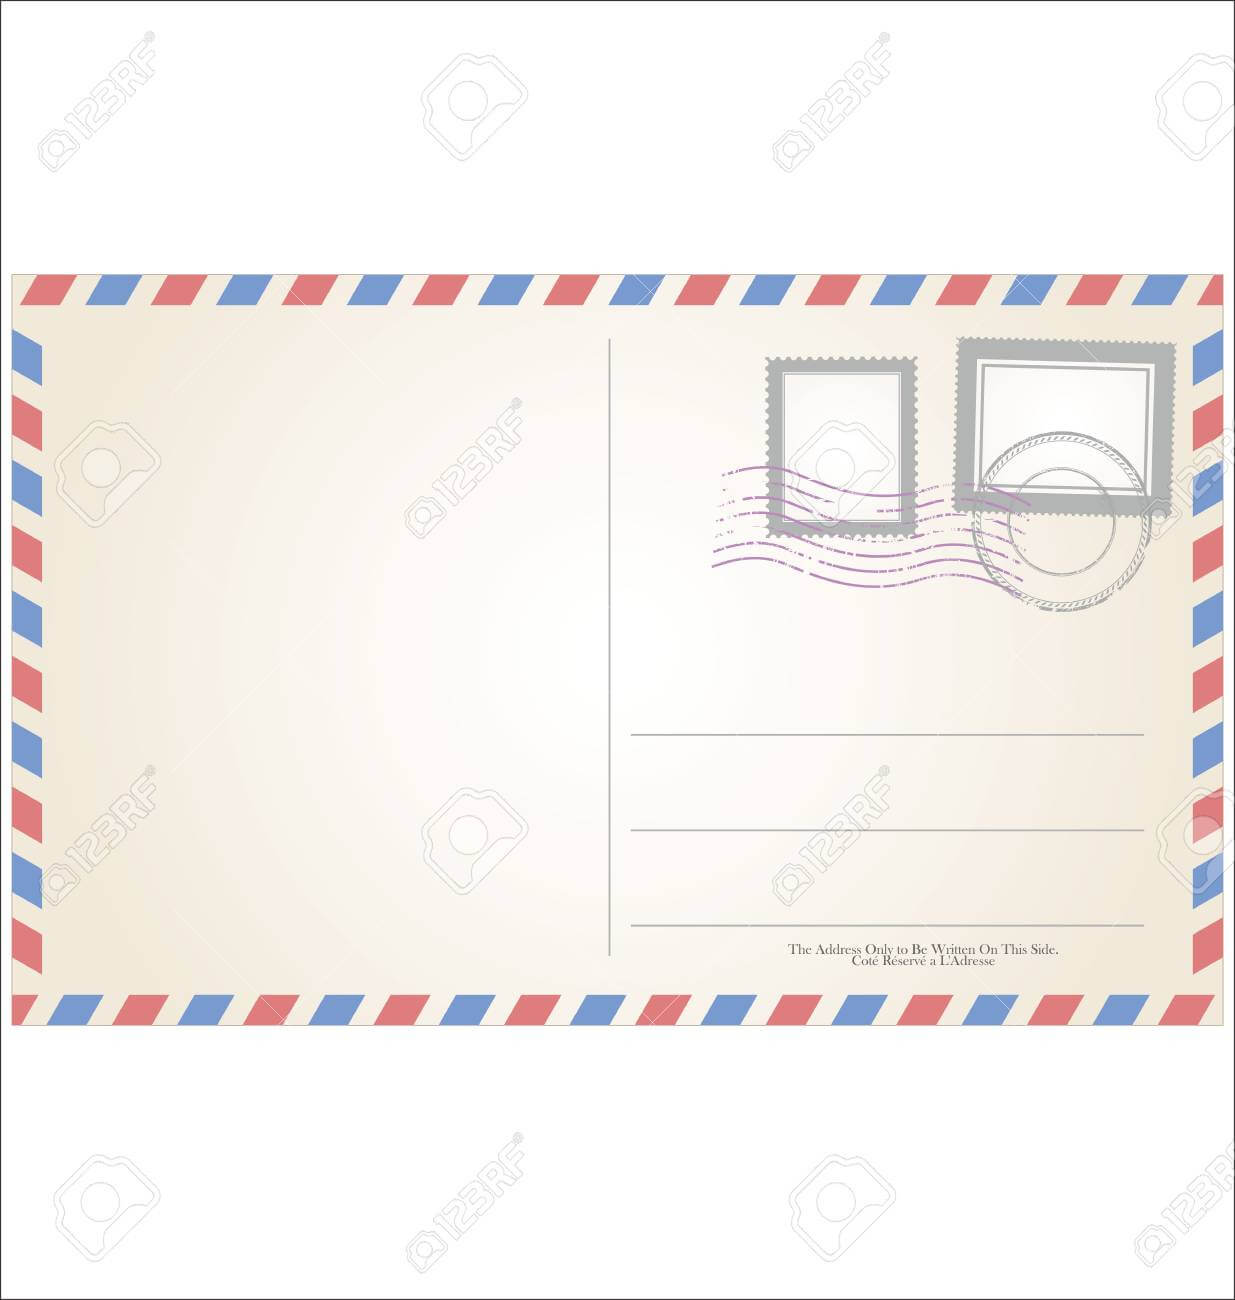 Post Card Template Vector Illustration Pertaining To Post Cards Template